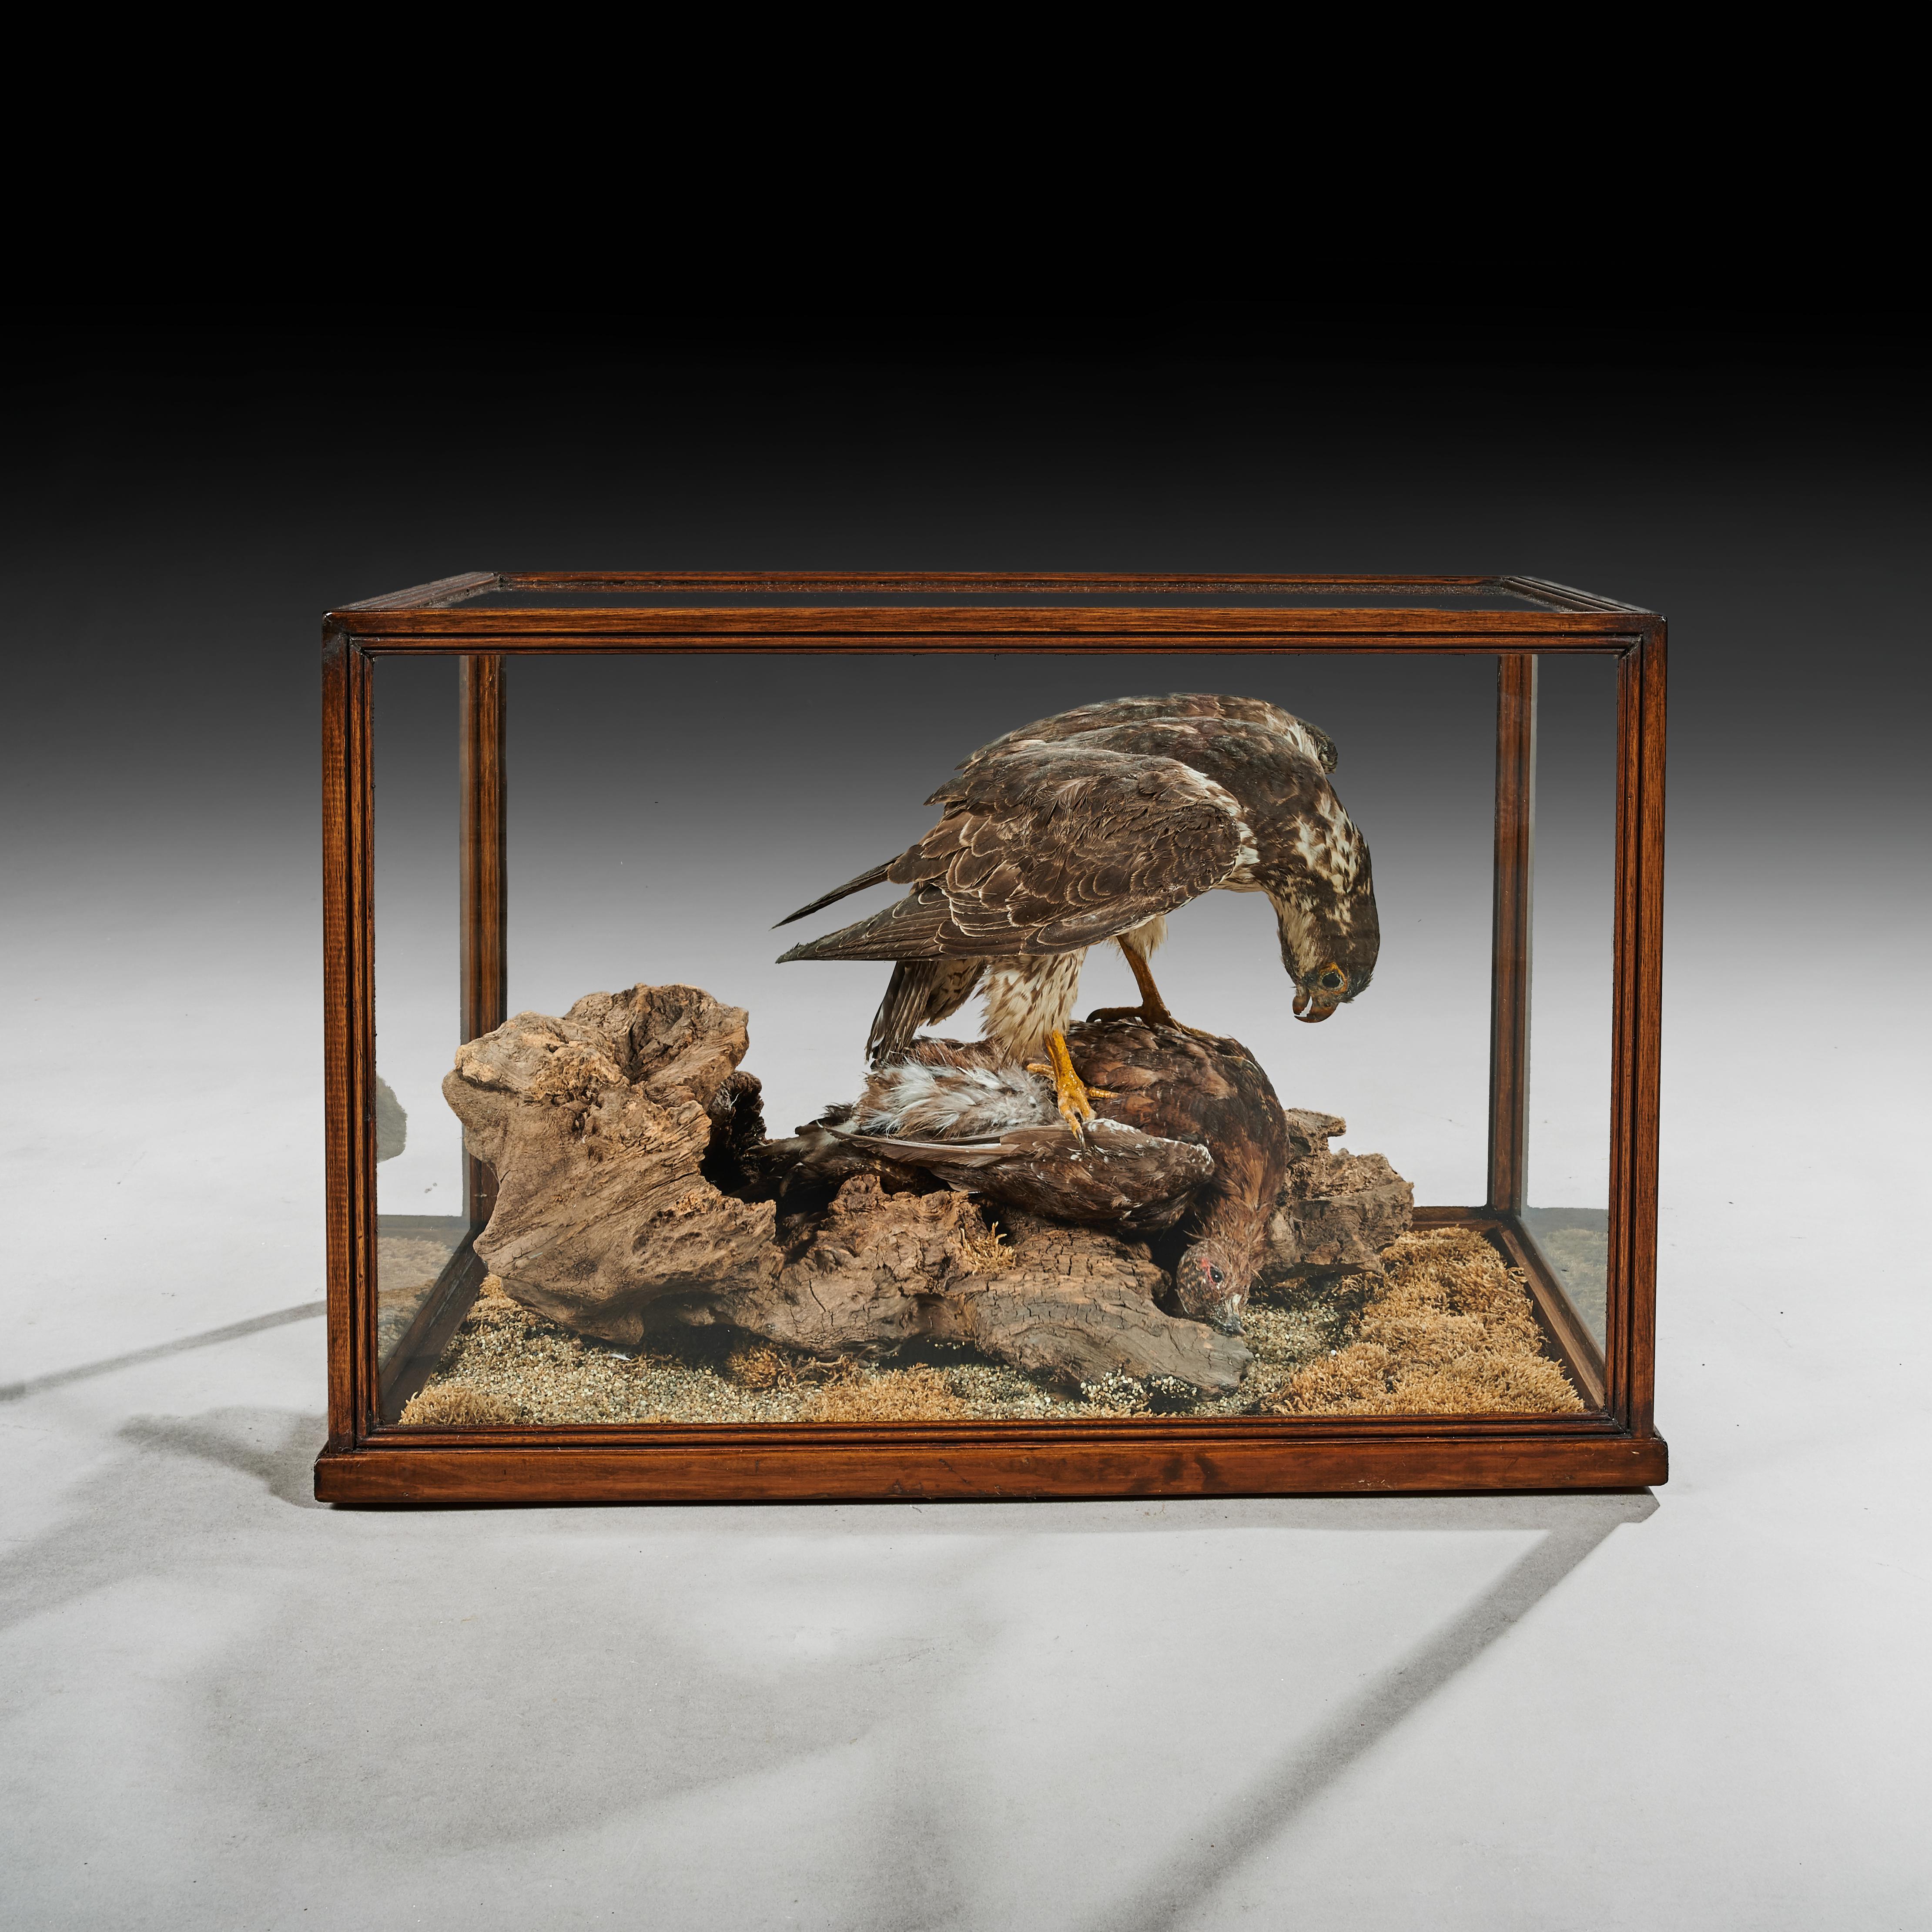 A well prepared late Victorian wooden removable cased taxidermy hawk with grouse as prey.

English, circa 1880.

In very good condition having the larger bird of prey the sparrow hawk perched over a red grouse mounted on naturalistic setting